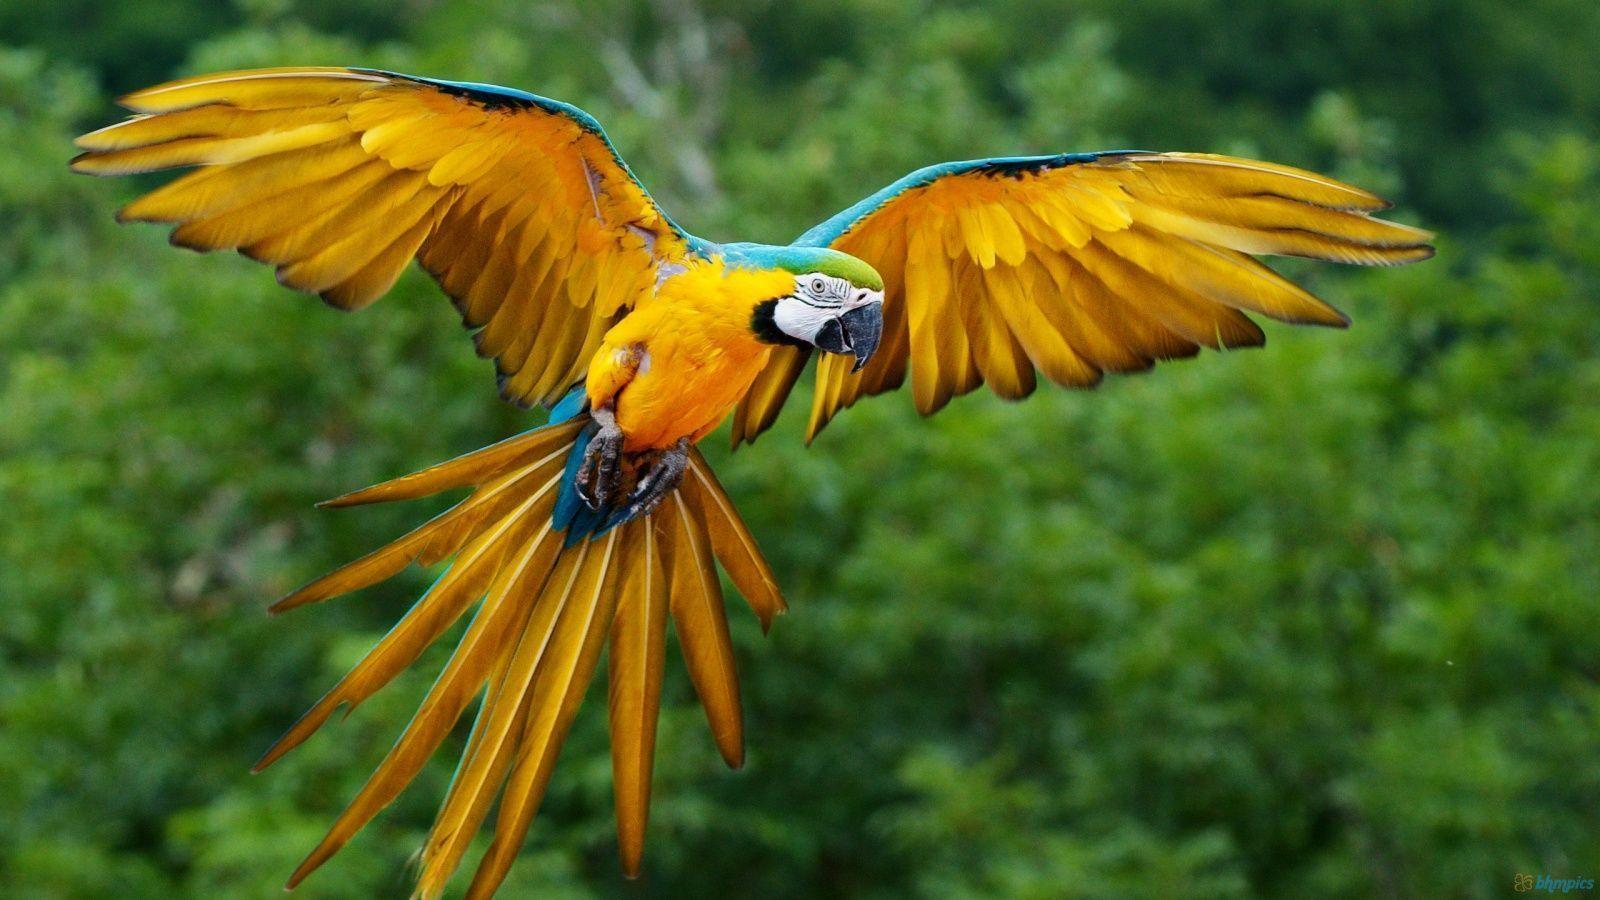 Blue And Yellow Macaw Wallpaper